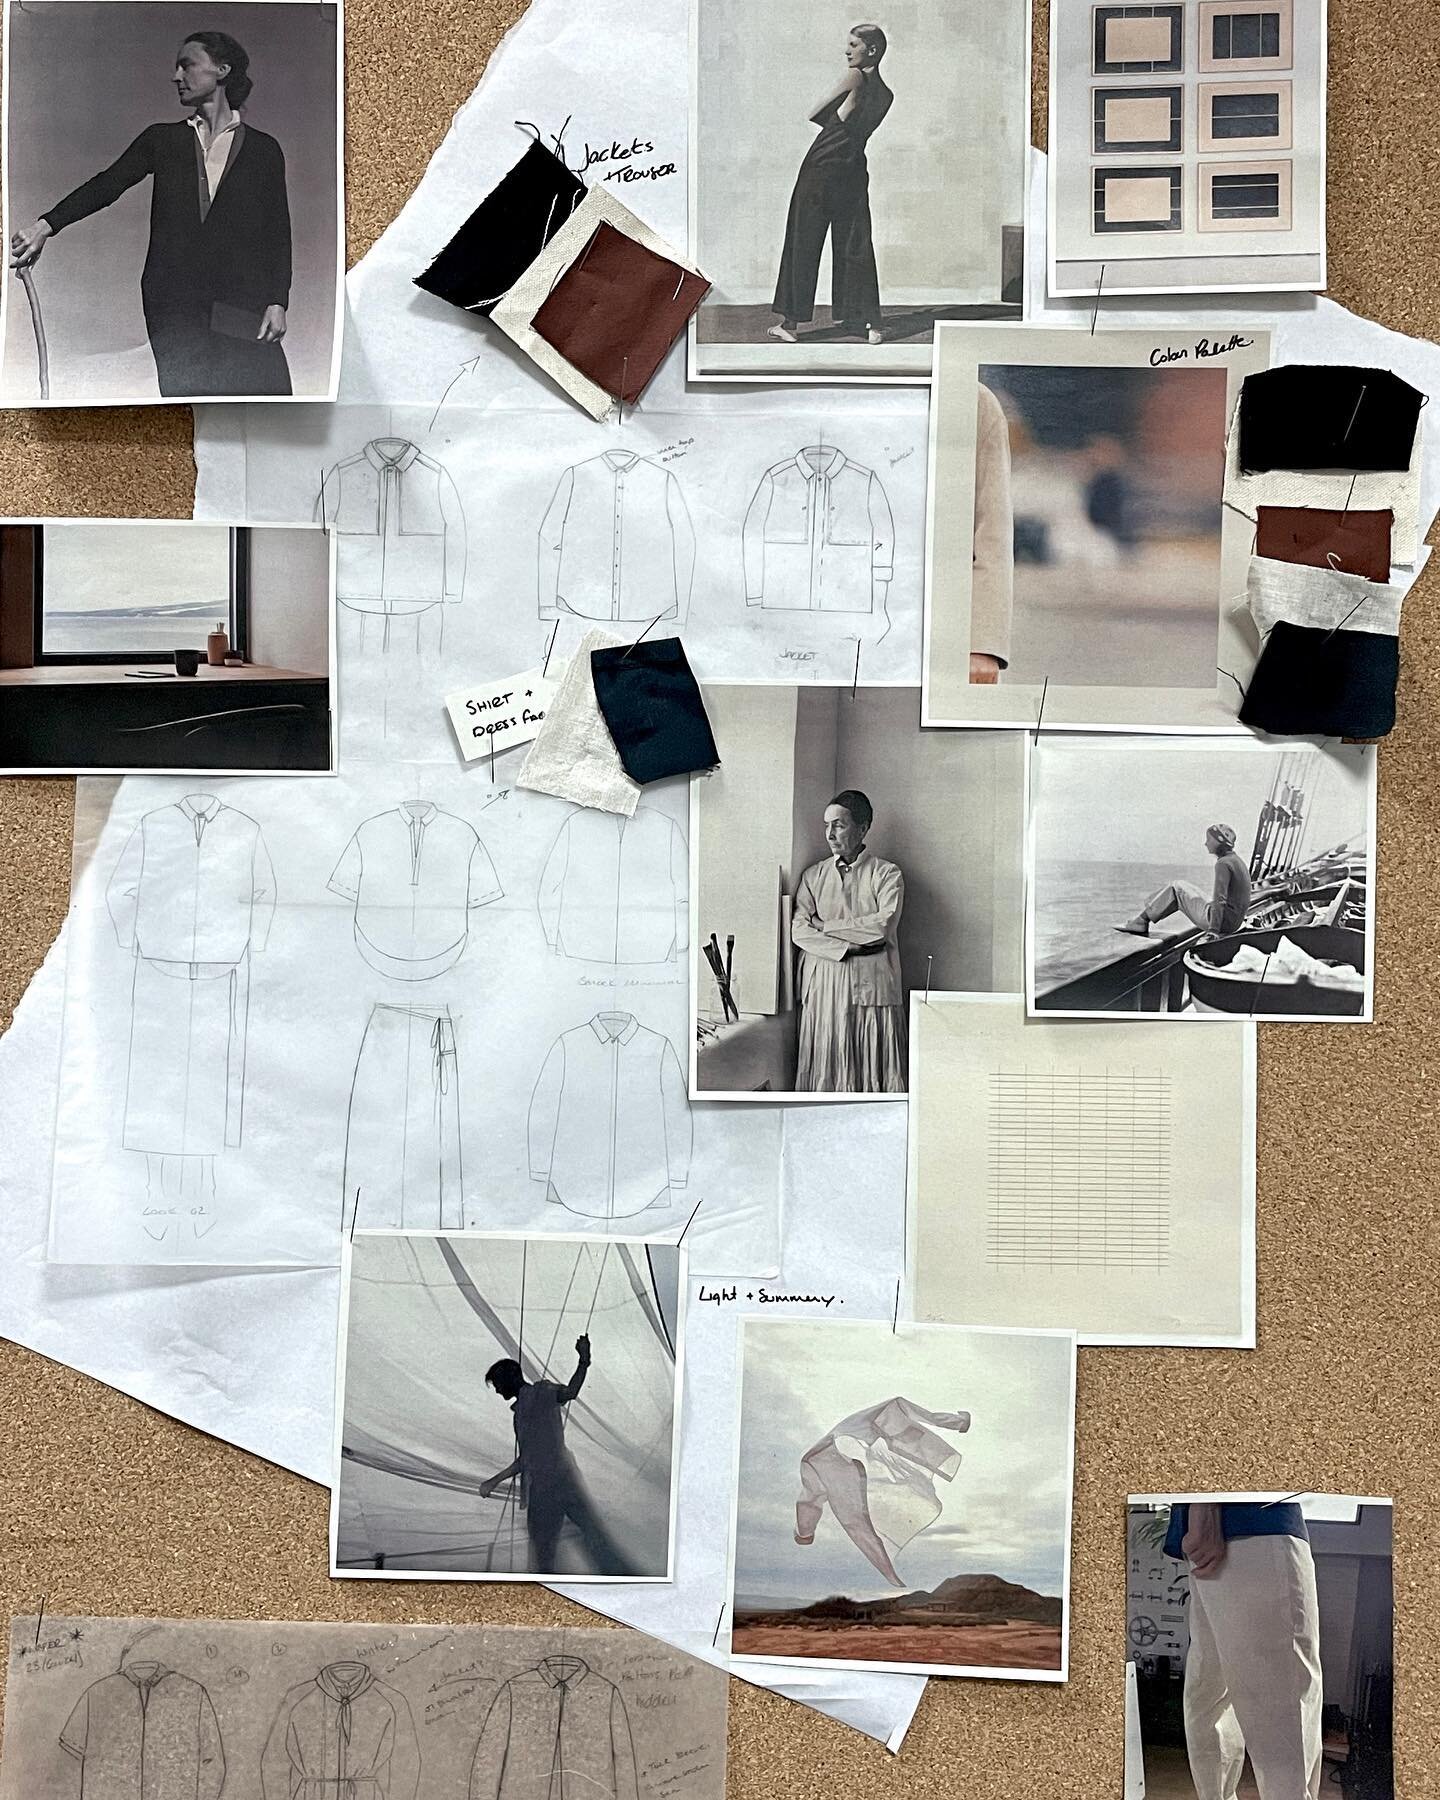 Collection 02 | Moodboard 

I lovely having a physical pinboard in the studio which evolves as the collection does. Here&rsquo;s a glimpse of our moodboard for Collection 02, featuring the different shapes, textures, colours and styles that have insp